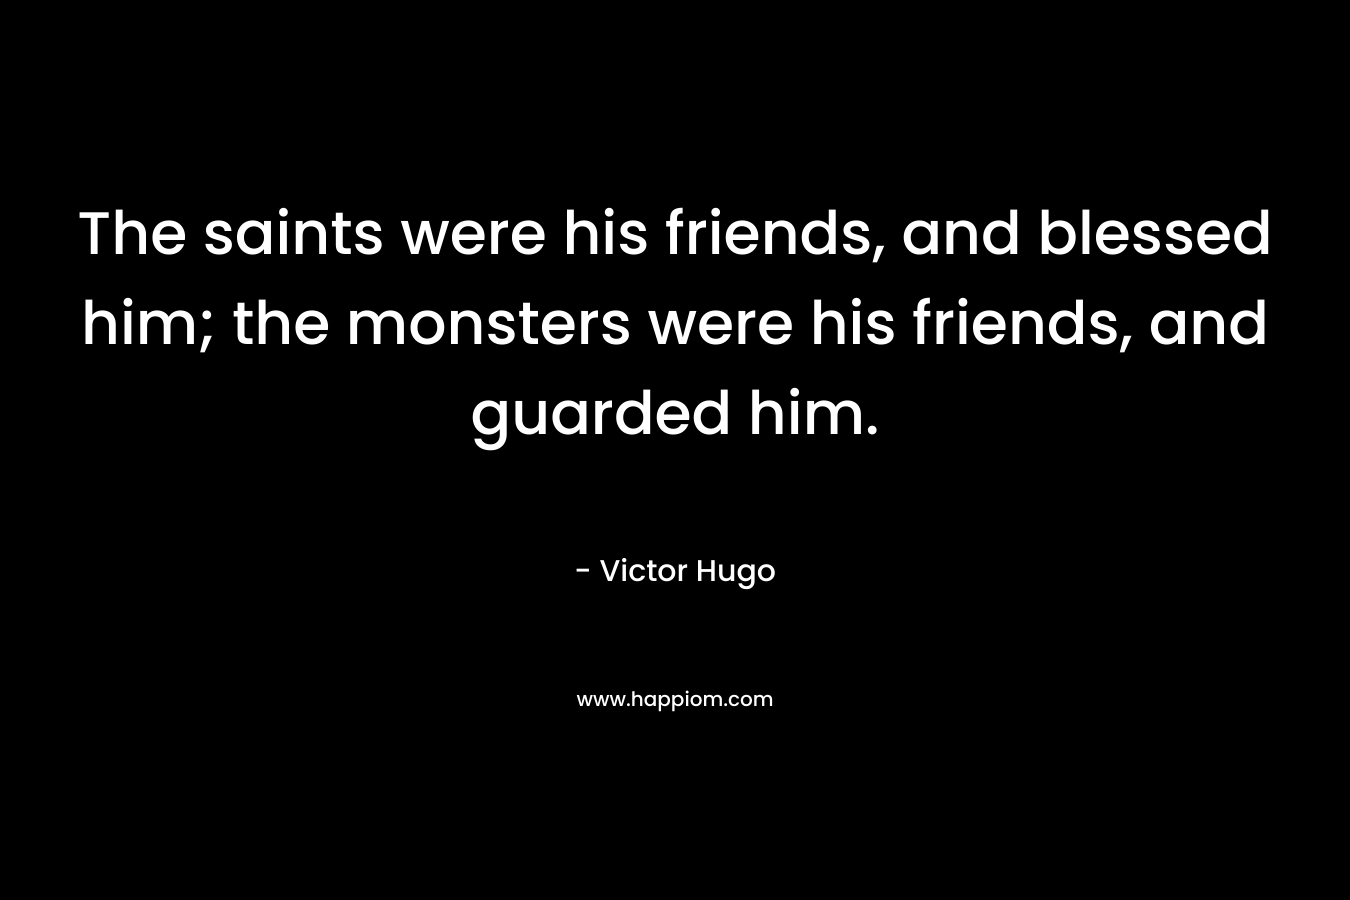 The saints were his friends, and blessed him; the monsters were his friends, and guarded him. – Victor Hugo